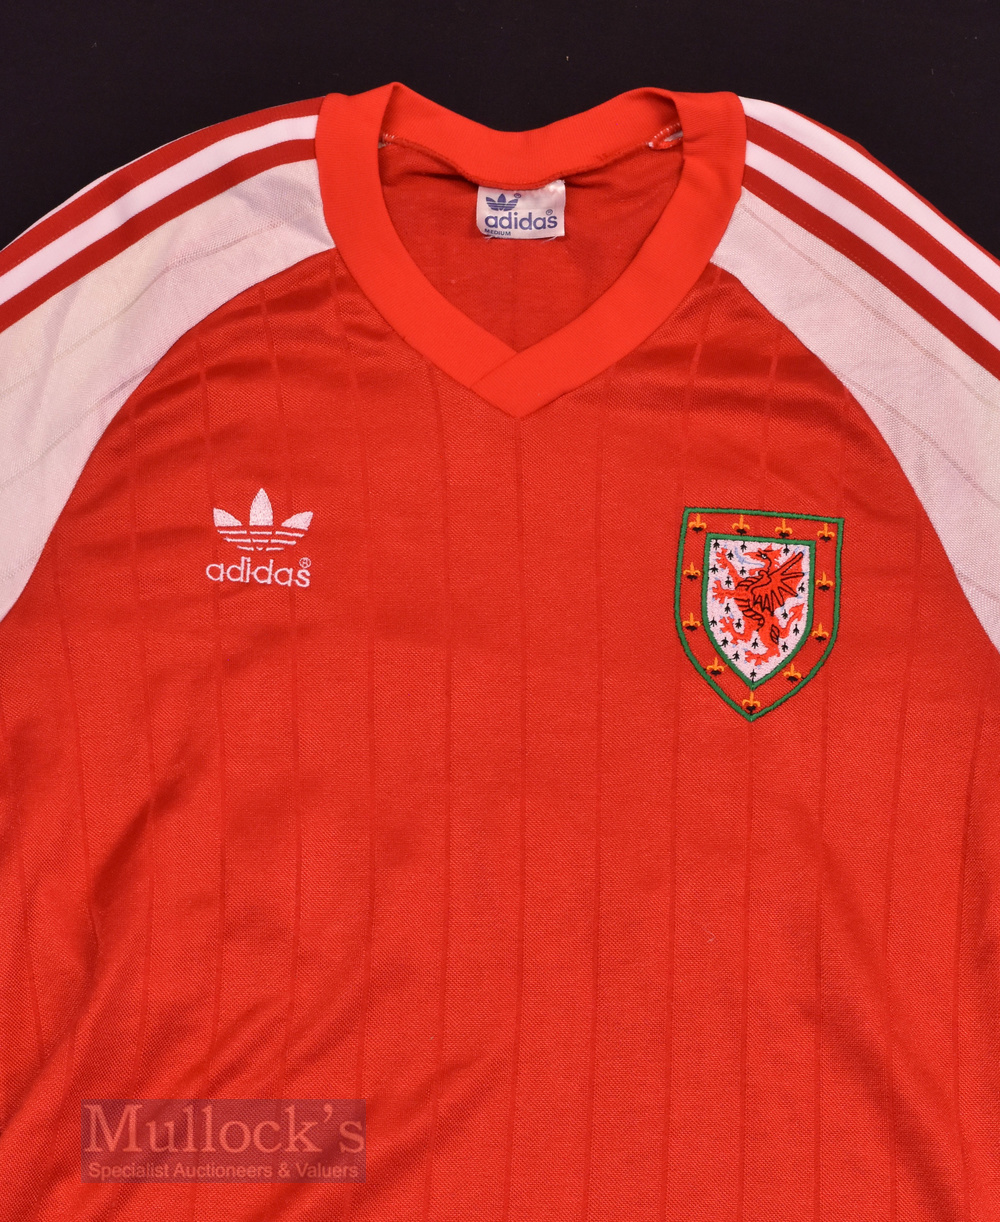 1983/84 Wales International Home football shirt size medium, in red and white, Adidas, long - Image 2 of 3